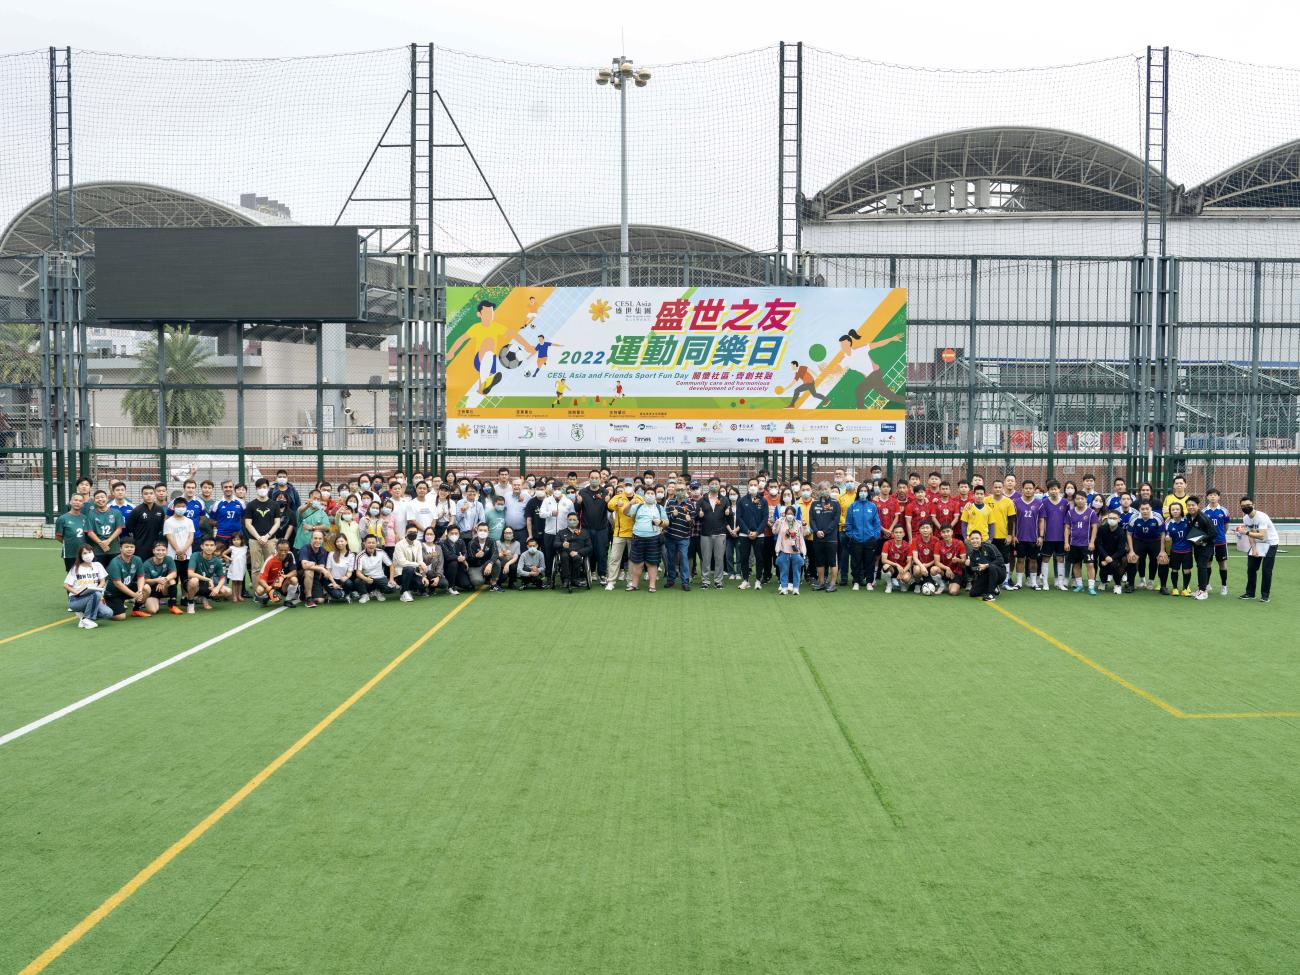 CESL Asia and Friends Sport Fun Day 2022